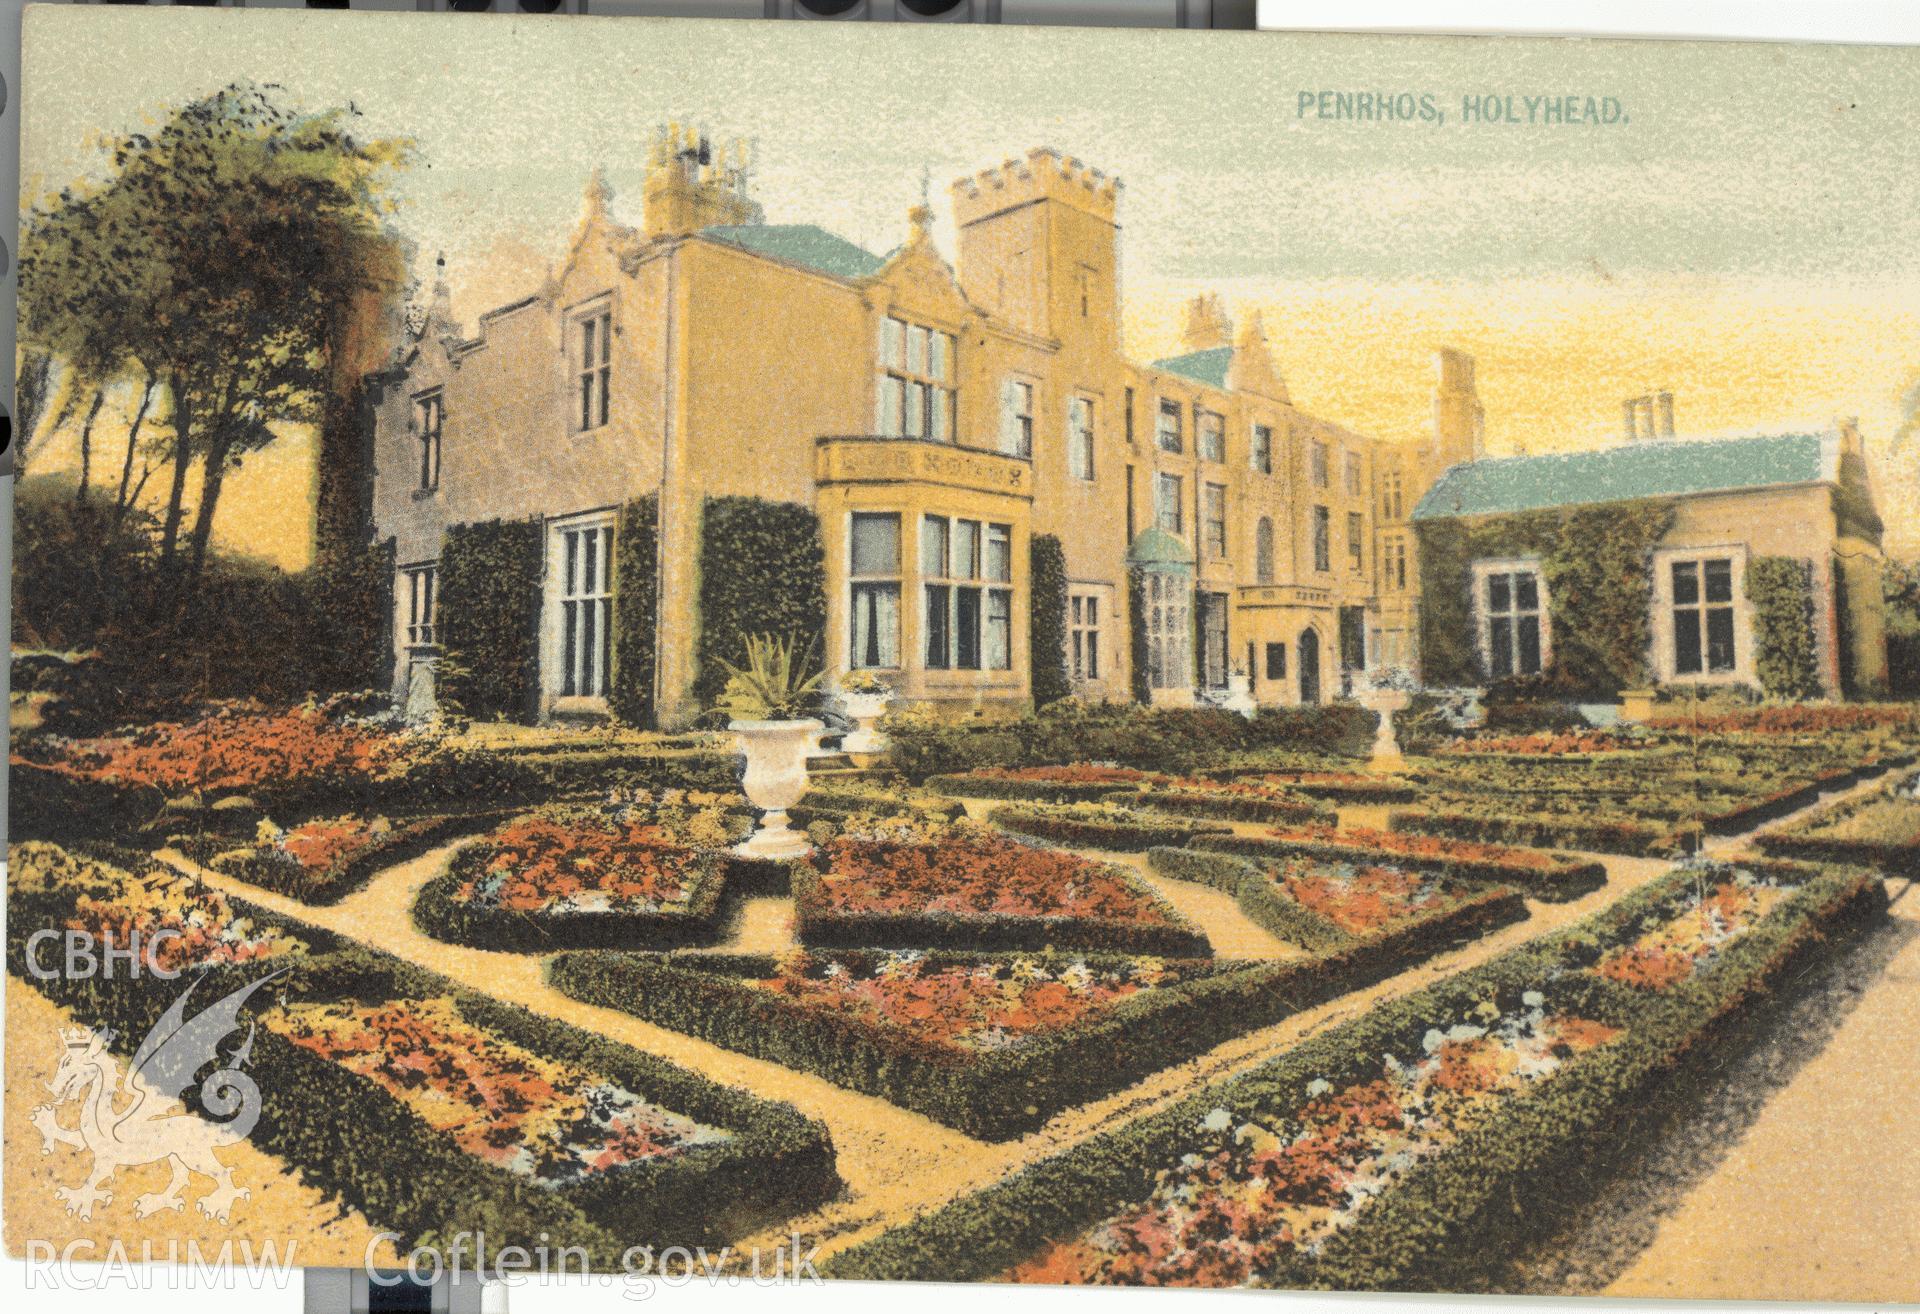 Digitised postcard image of Penrhos, Holyhead, W.O. Jones, Compton House, Holyhead. Produced by Parks and Gardens Data Services, from an original item in the Peter Davis Collection at Parks and Gardens UK. We hold only web-resolution images of this collection, suitable for viewing on screen and for research purposes only. We do not hold the original images, or publication quality scans.